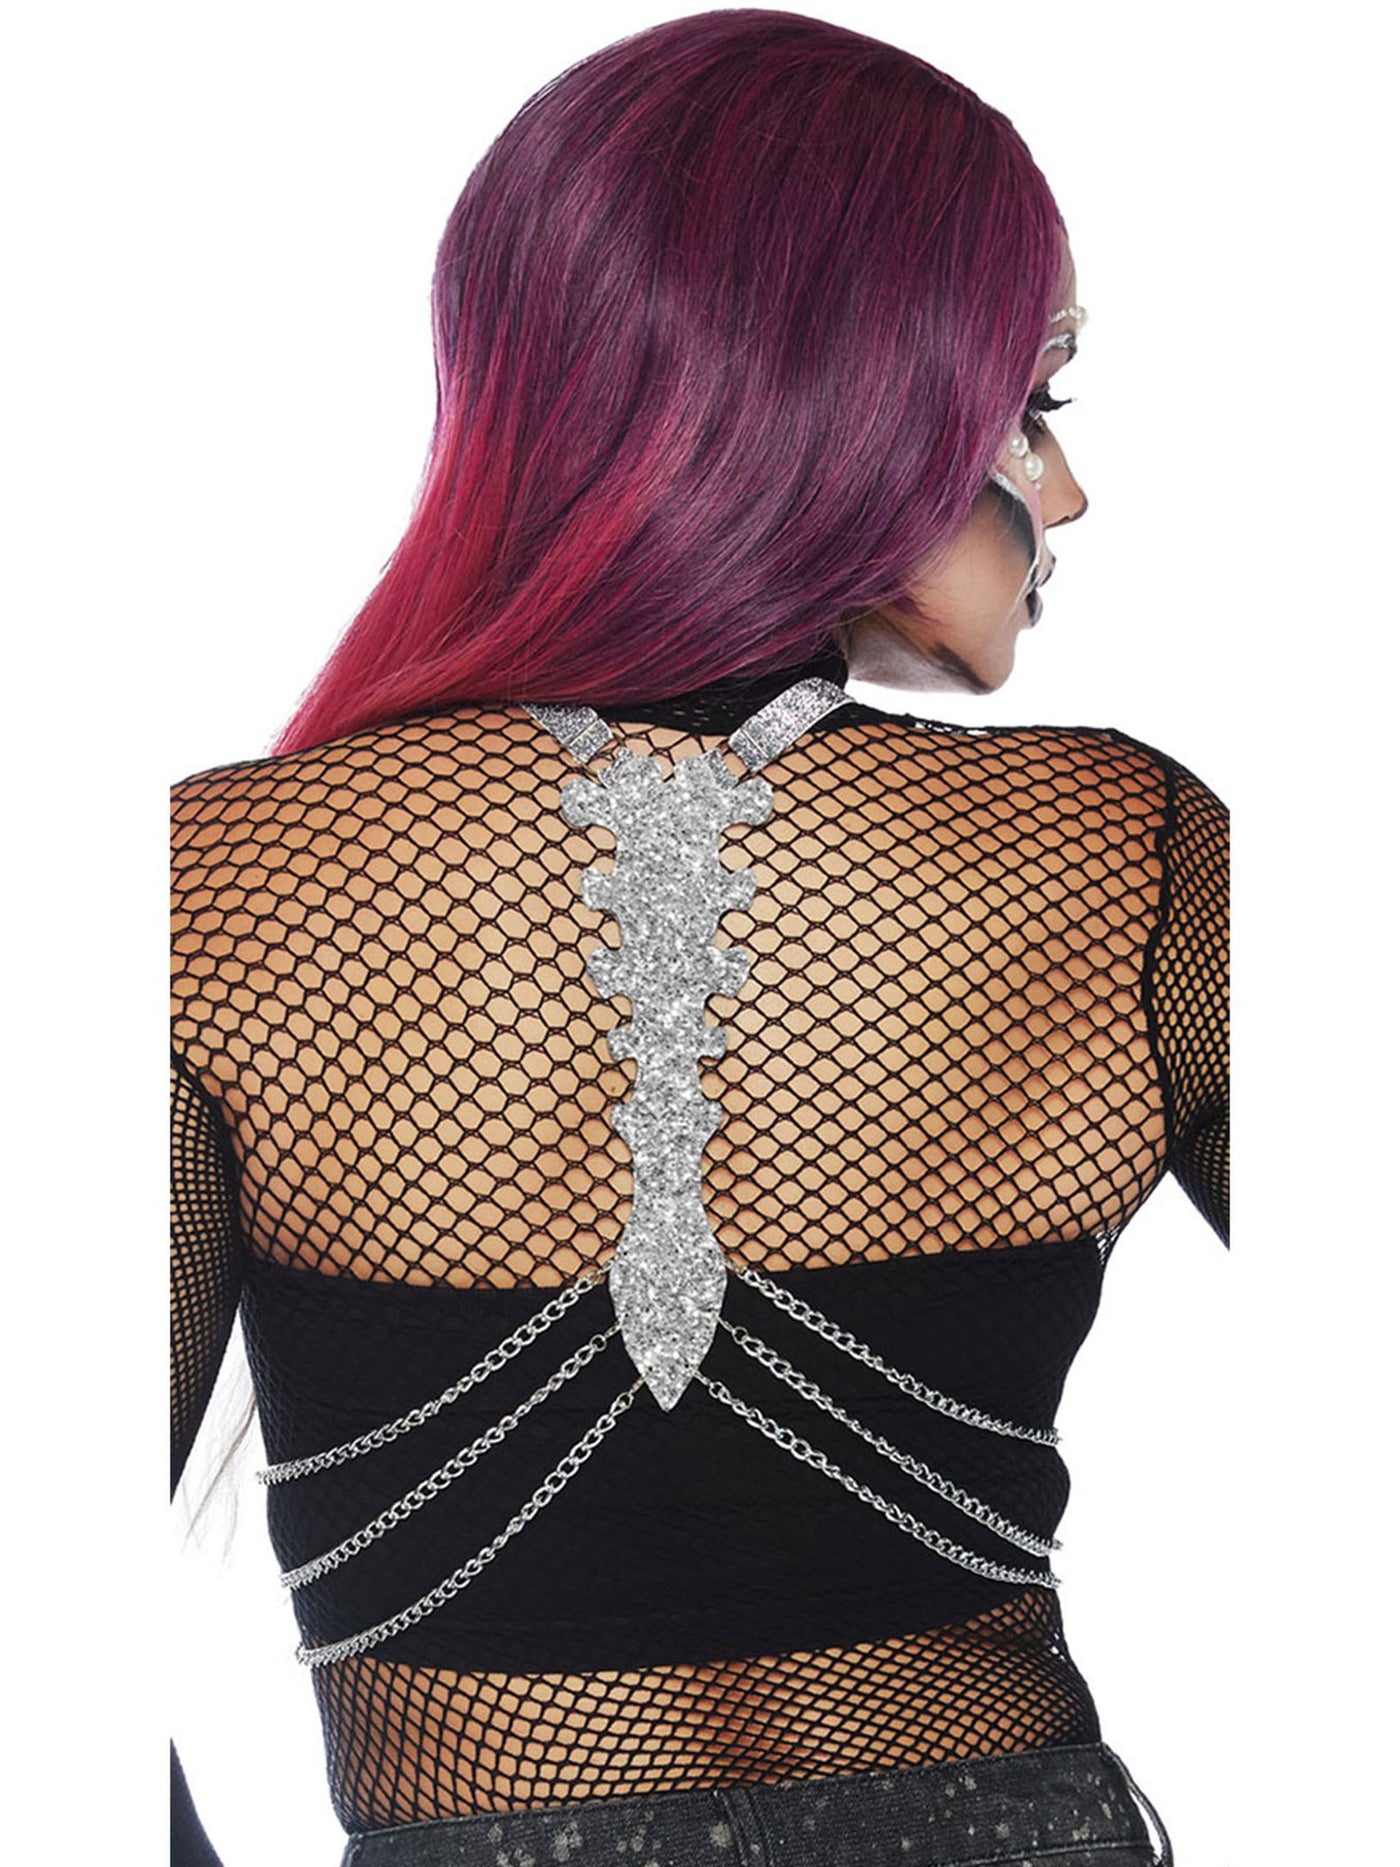 Glitter Skeleton Bone Body Harness with Chains - Shop Fortune Costumes Lingerie